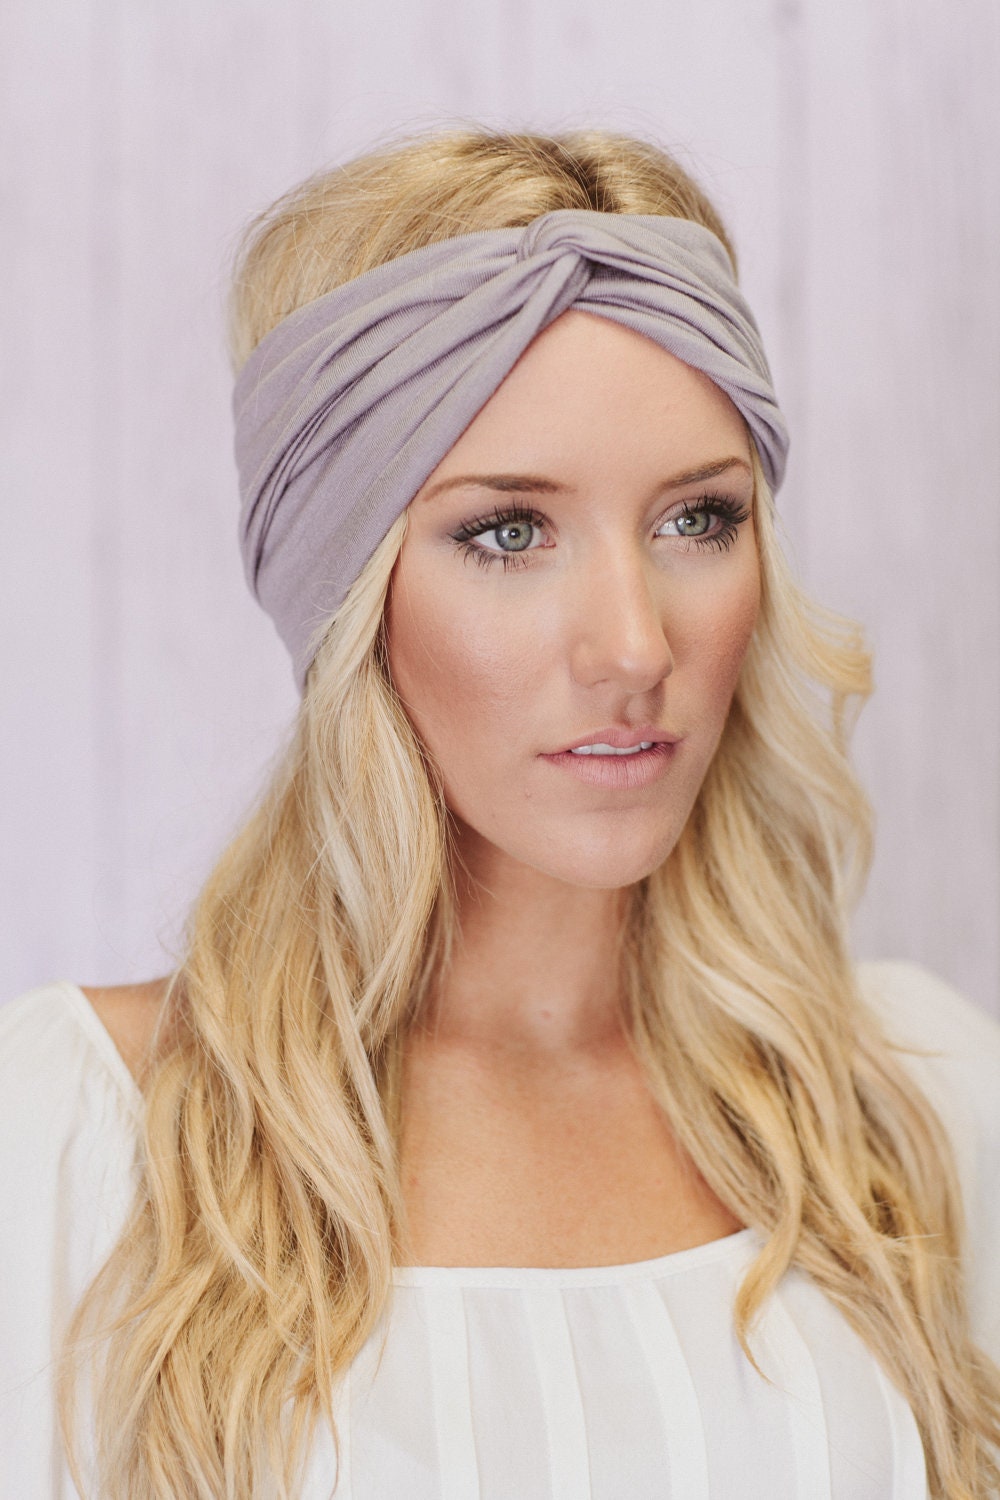 Turban Headband in Silver Gray Workout Twist Hair Bands (T02)